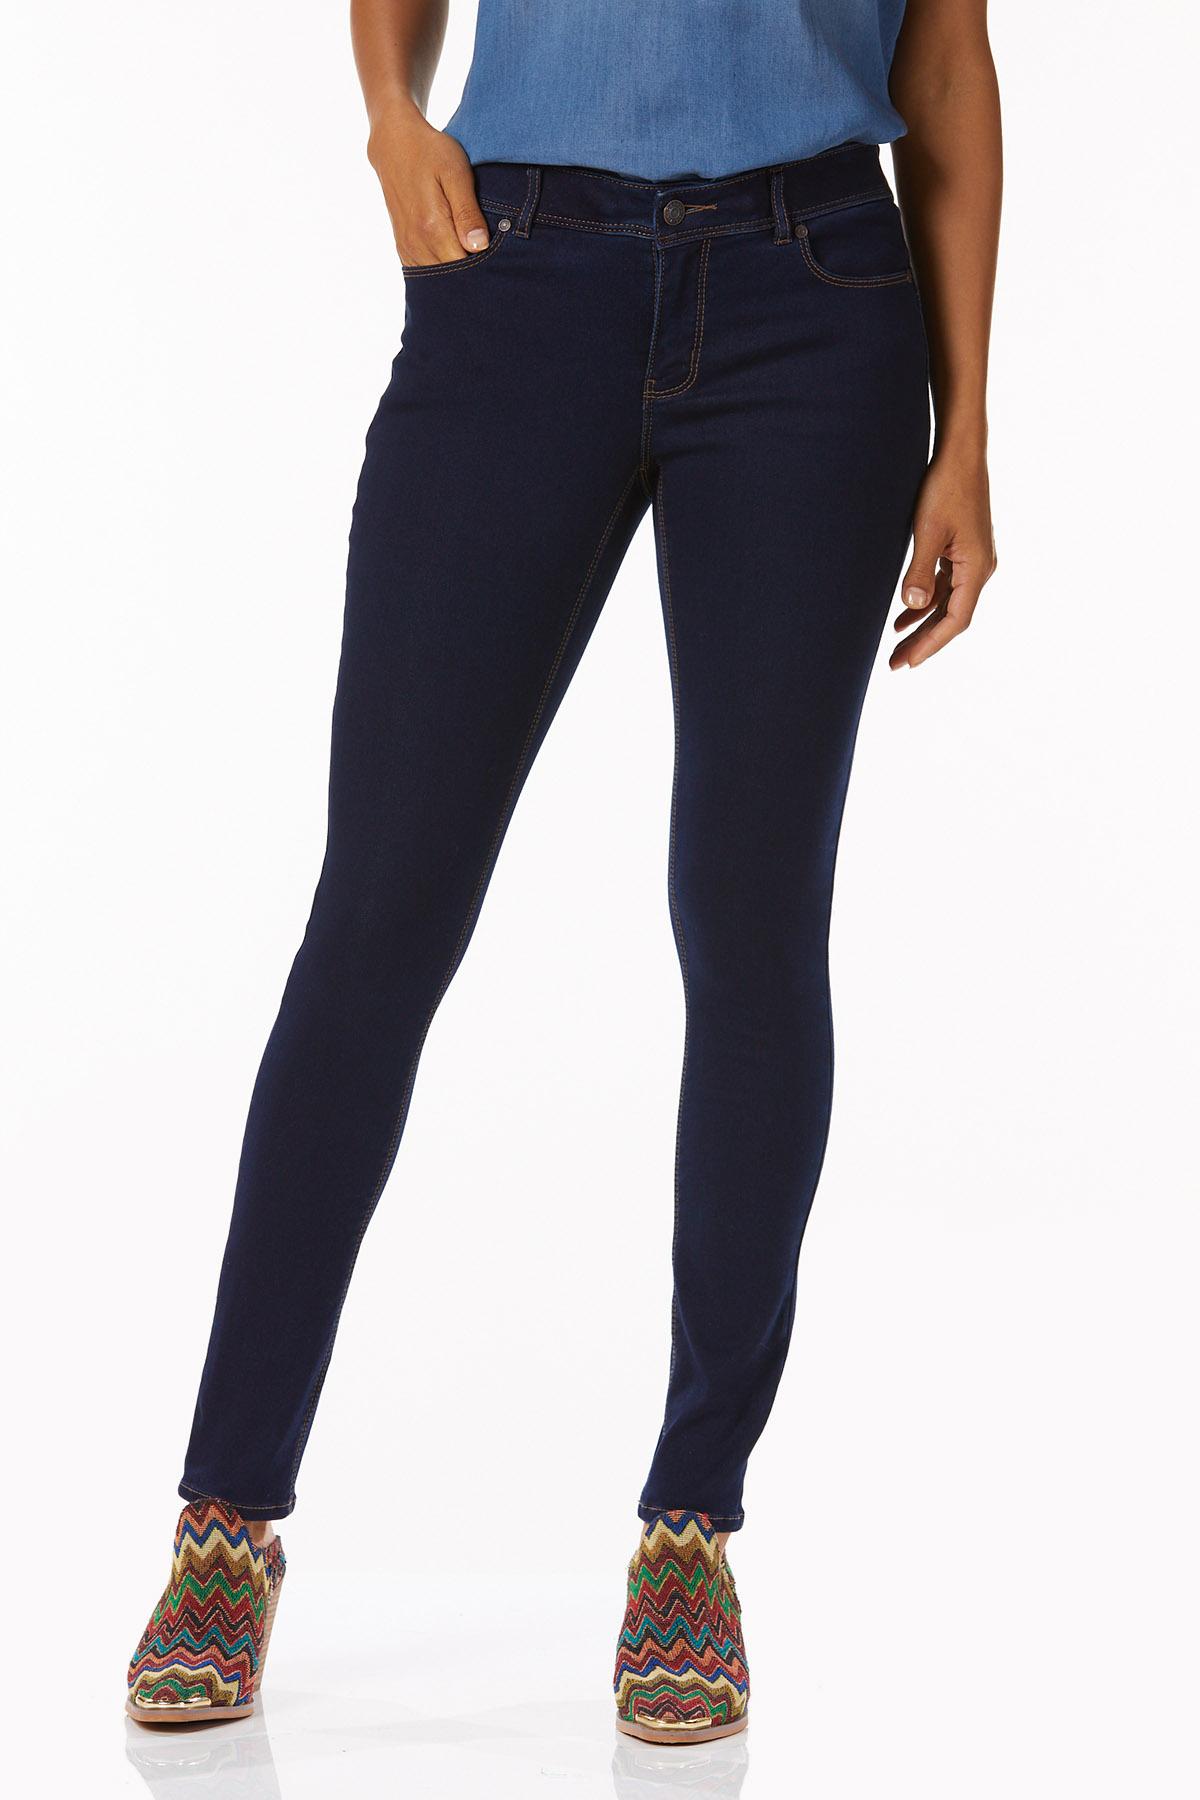 Petite The Perfect Jeggings